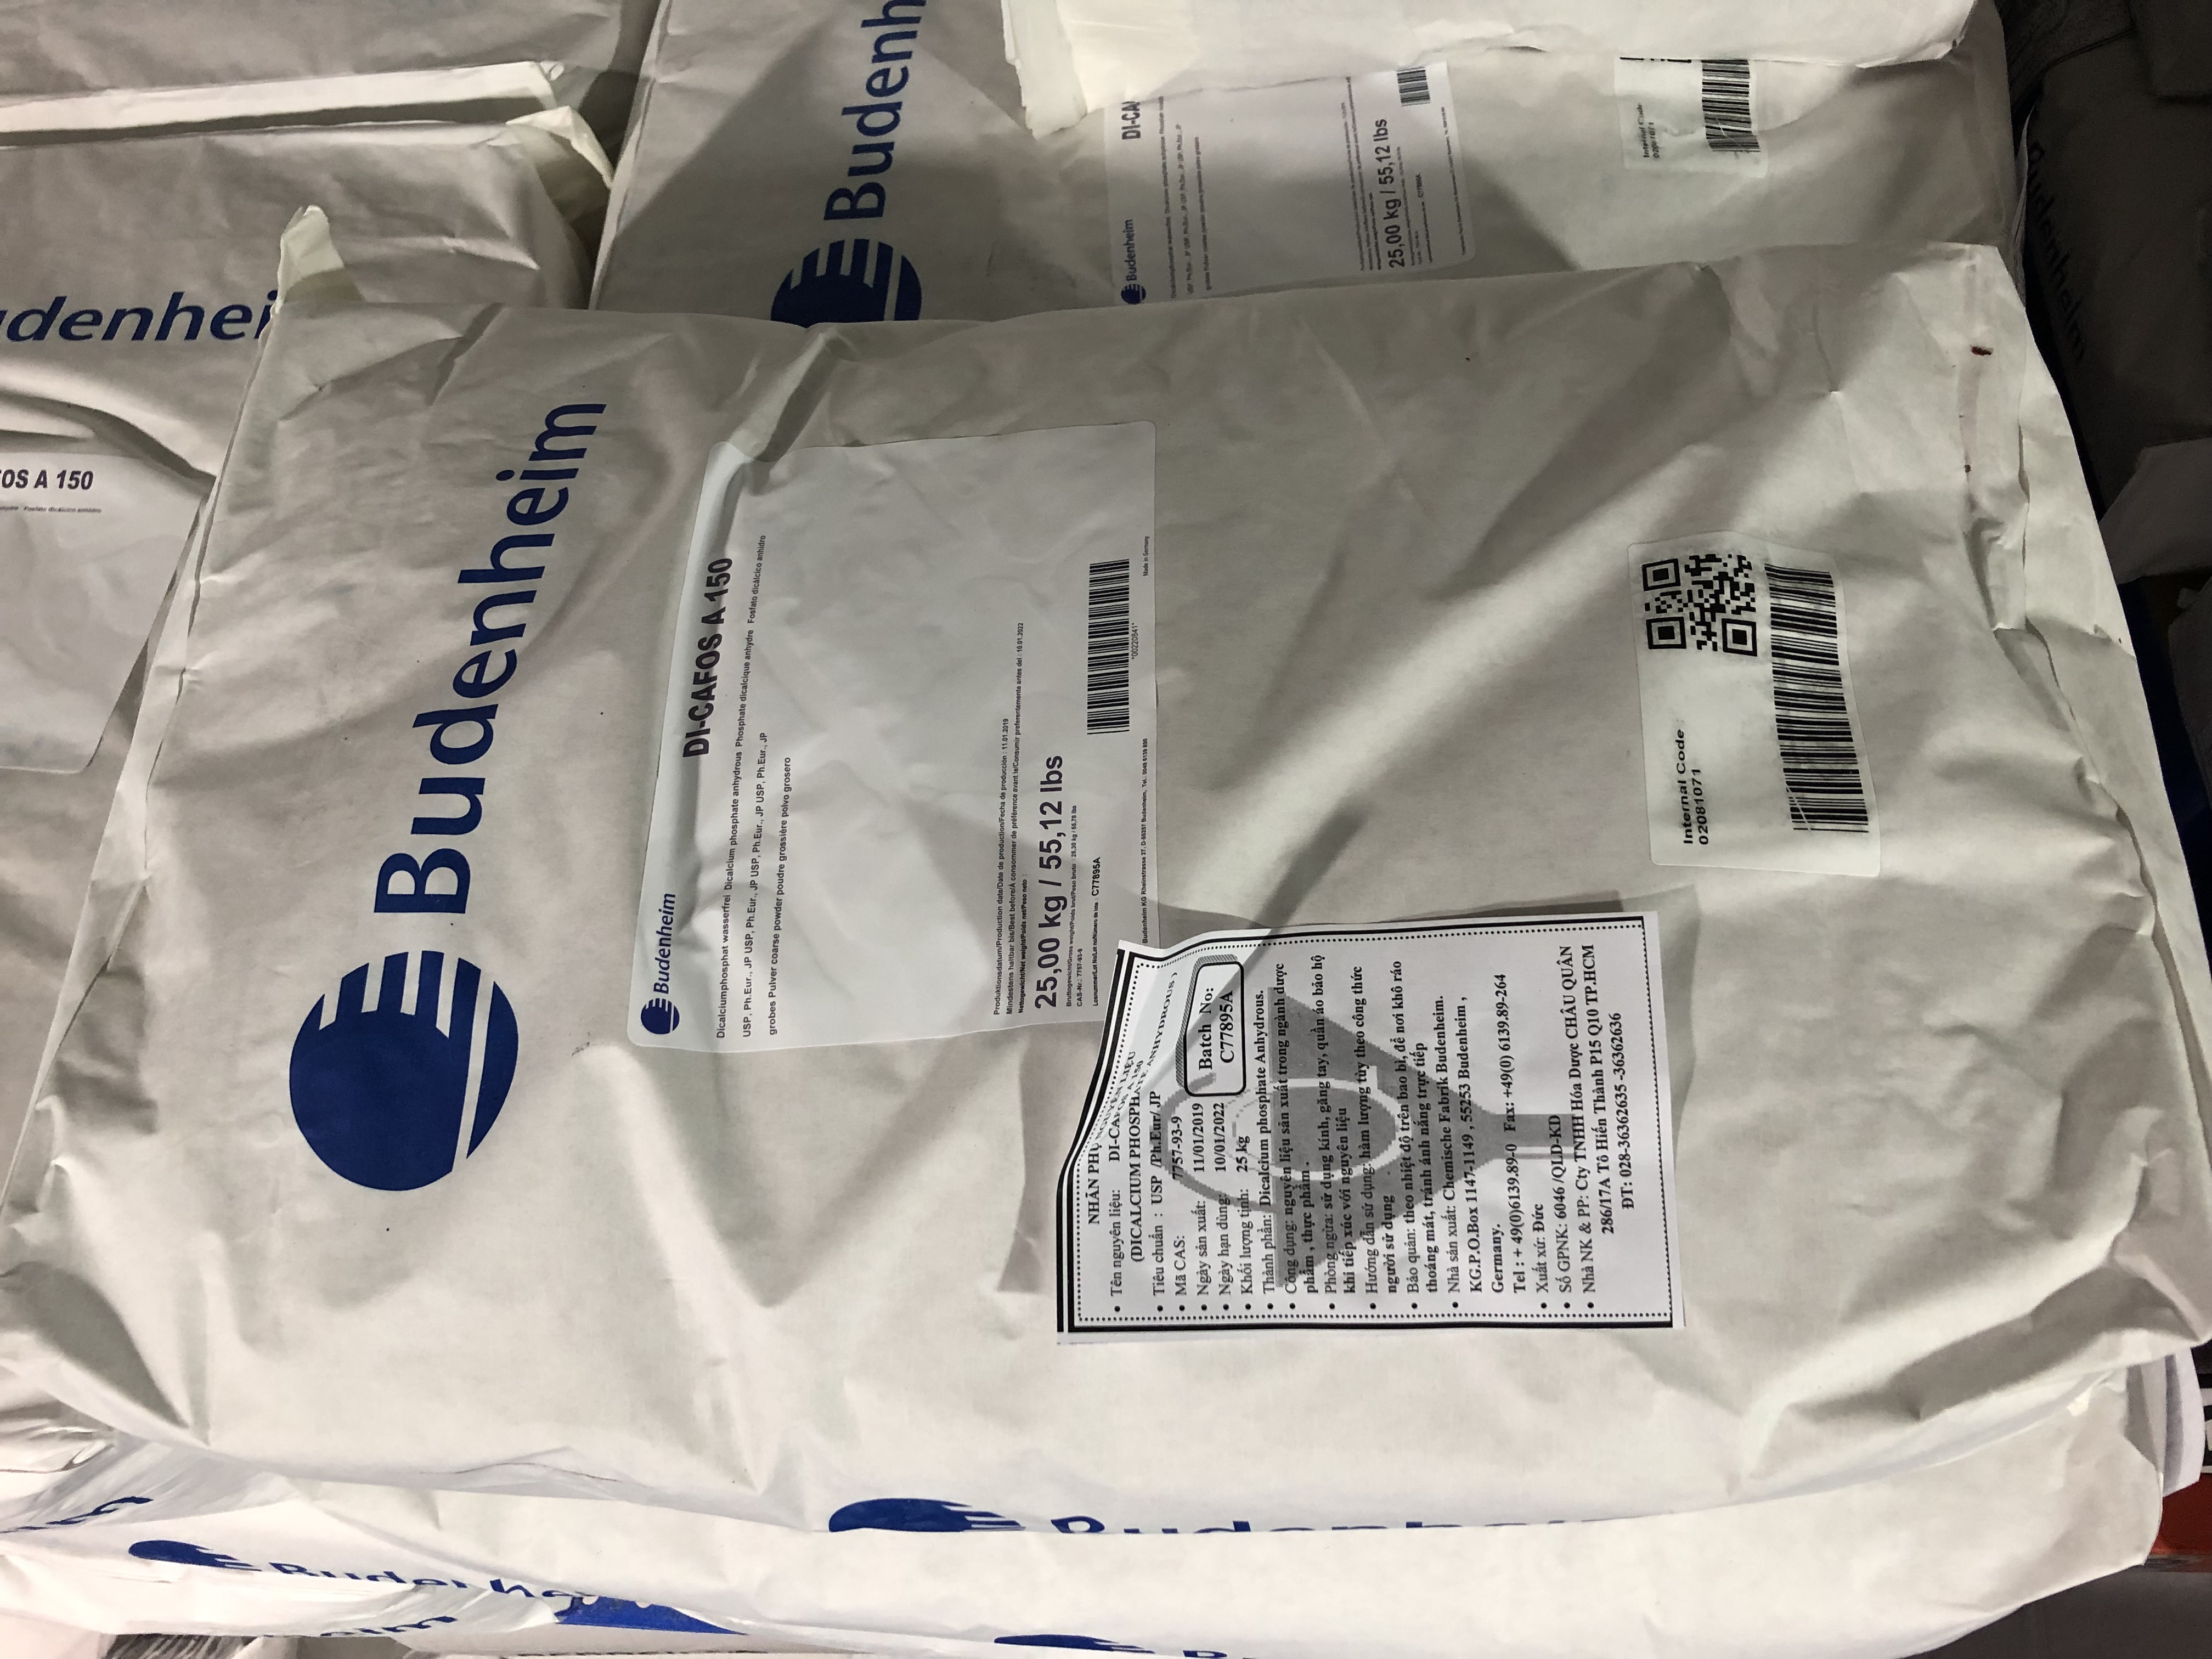 DICALCIUM PHOSPHATE ANHYDROUS A150